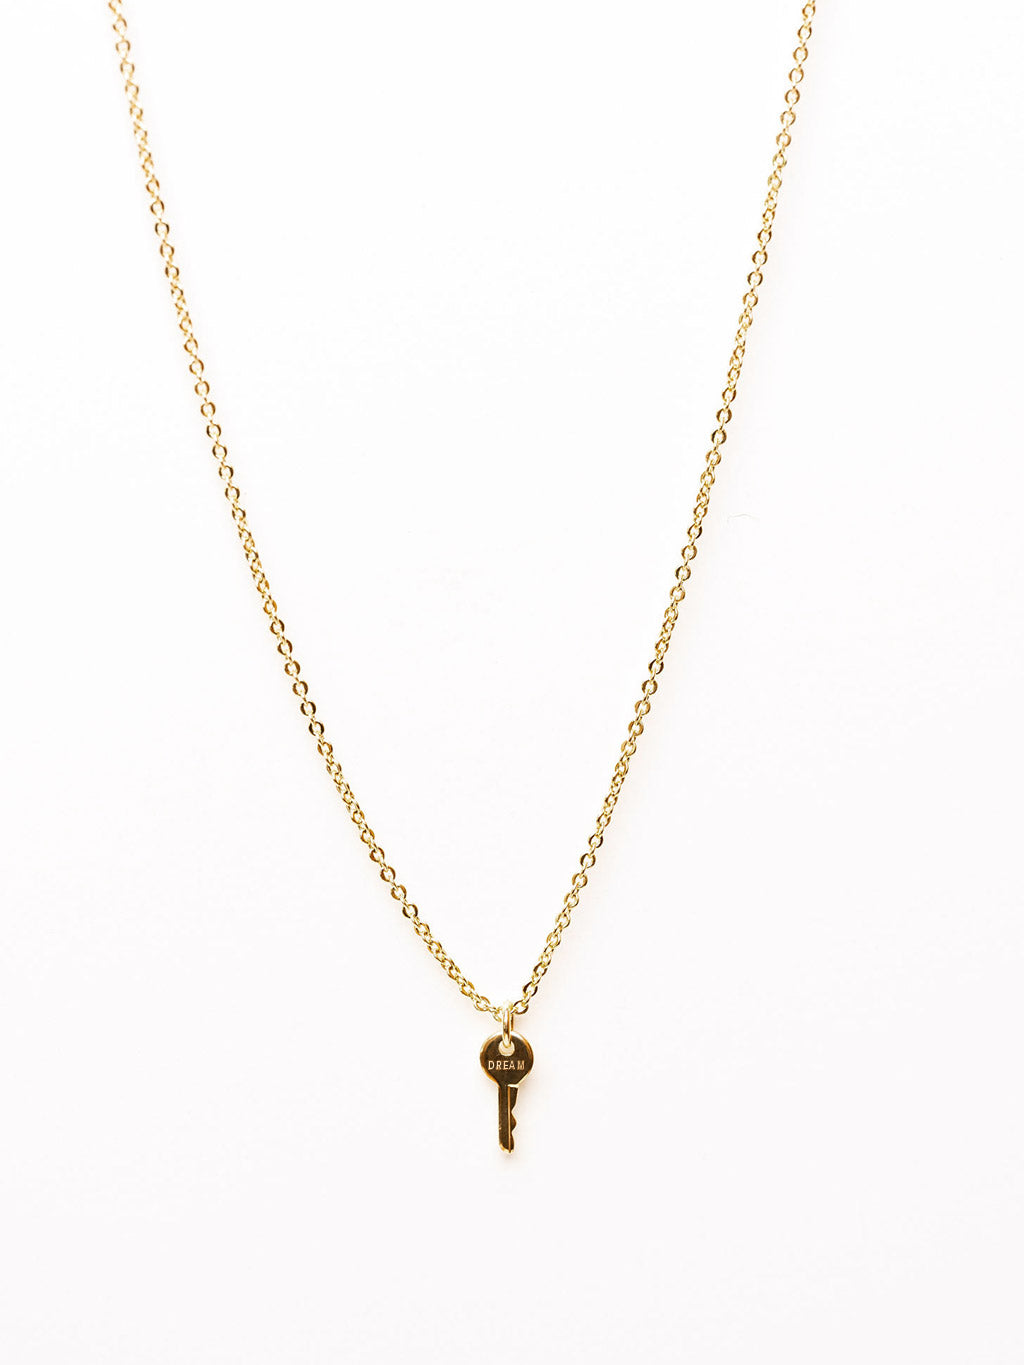 Mini Key Necklace Necklaces The Giving Keys DREAM Gold 